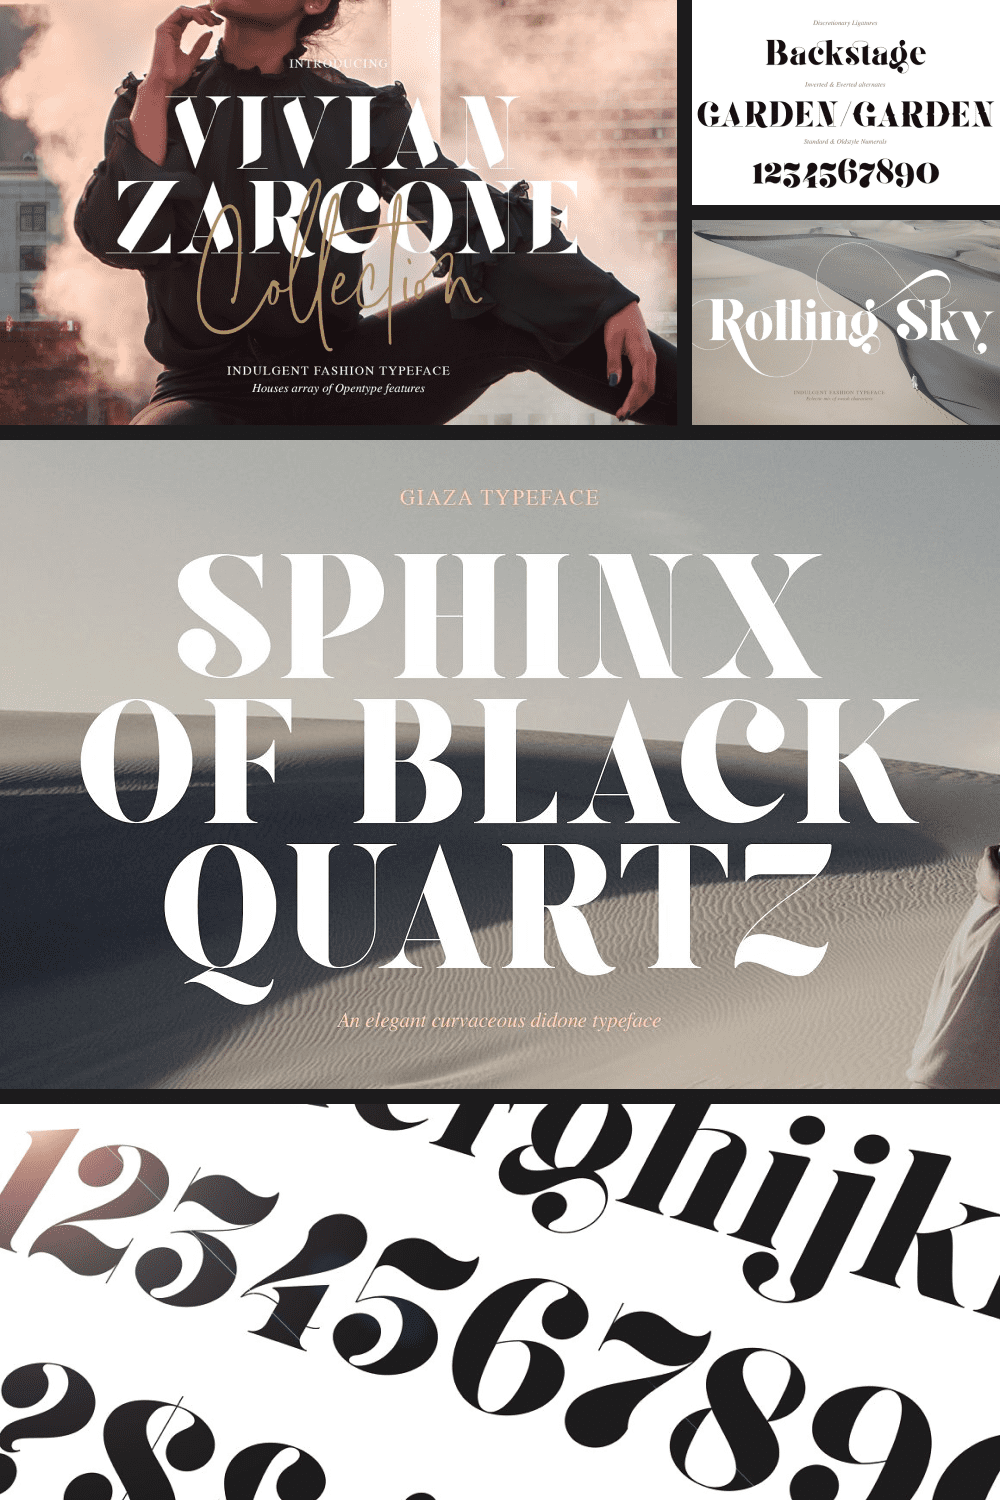 This is a desert font. His style and creativity will diversify any text and add flavor to the brand.